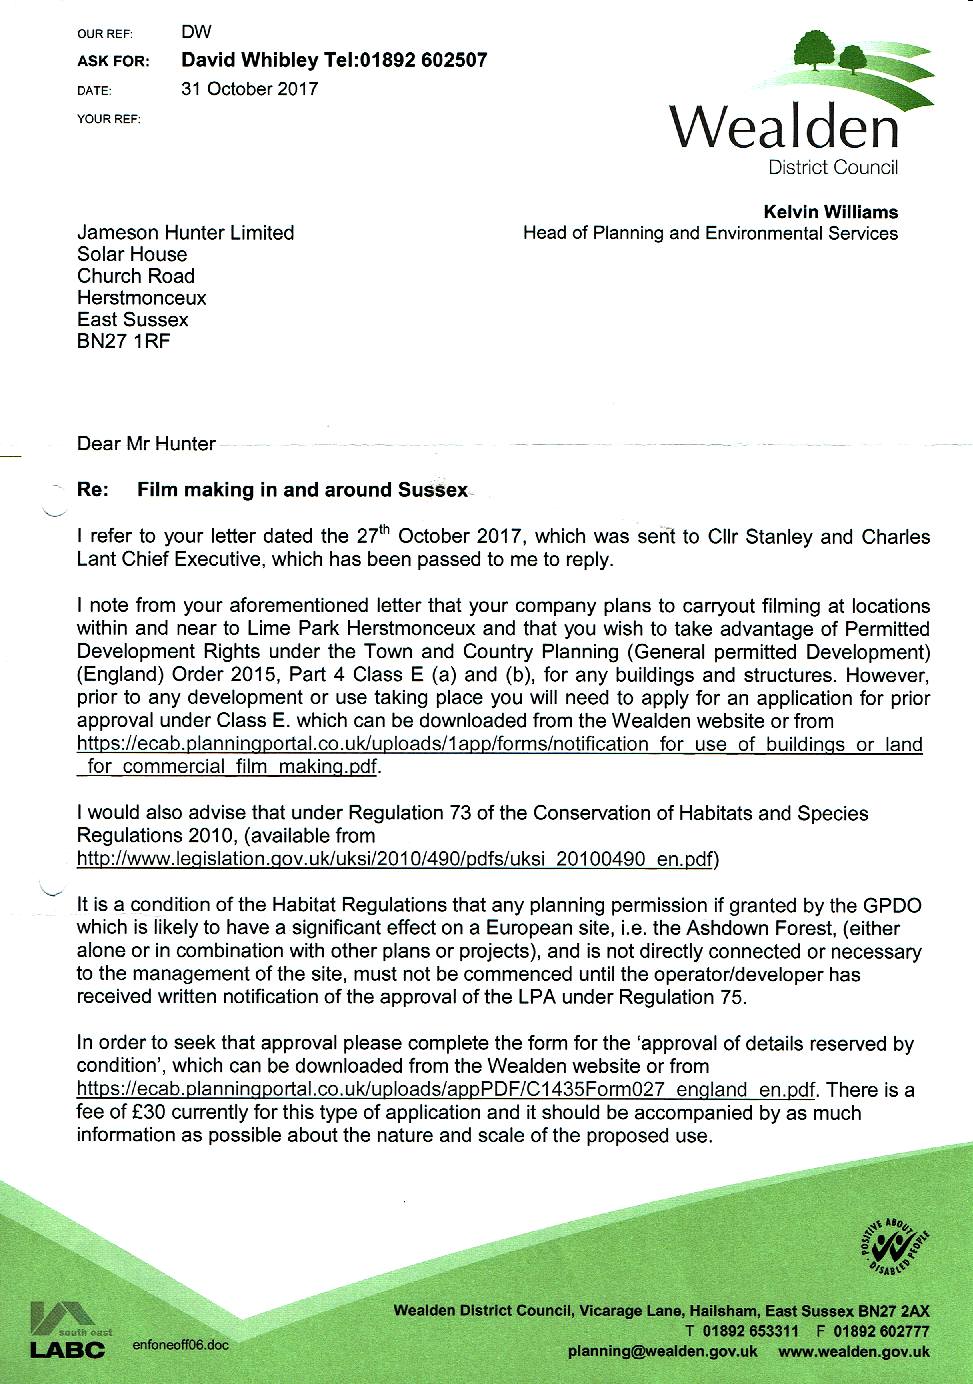 Jameson Hunter filming in Sussex not allowed by Wealden District Council